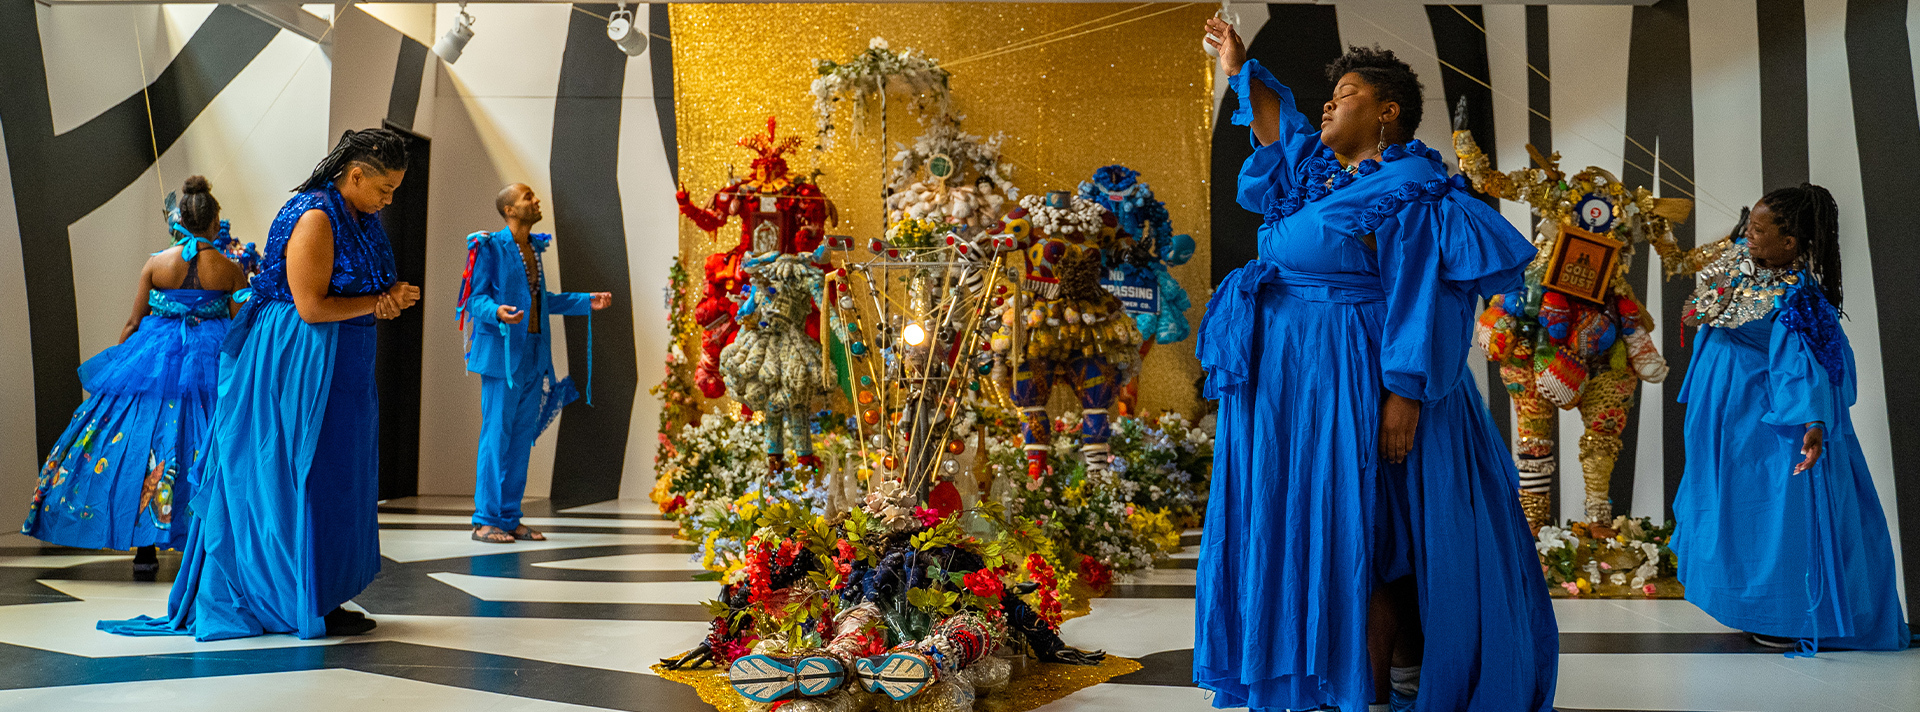 Exhibitions banner - photo of artist Vanessa German in a blue dress with one arm raised standing in front a vibrant gold installation in her exhibition "sometimes.we.cannot.be.with.our.bodies."